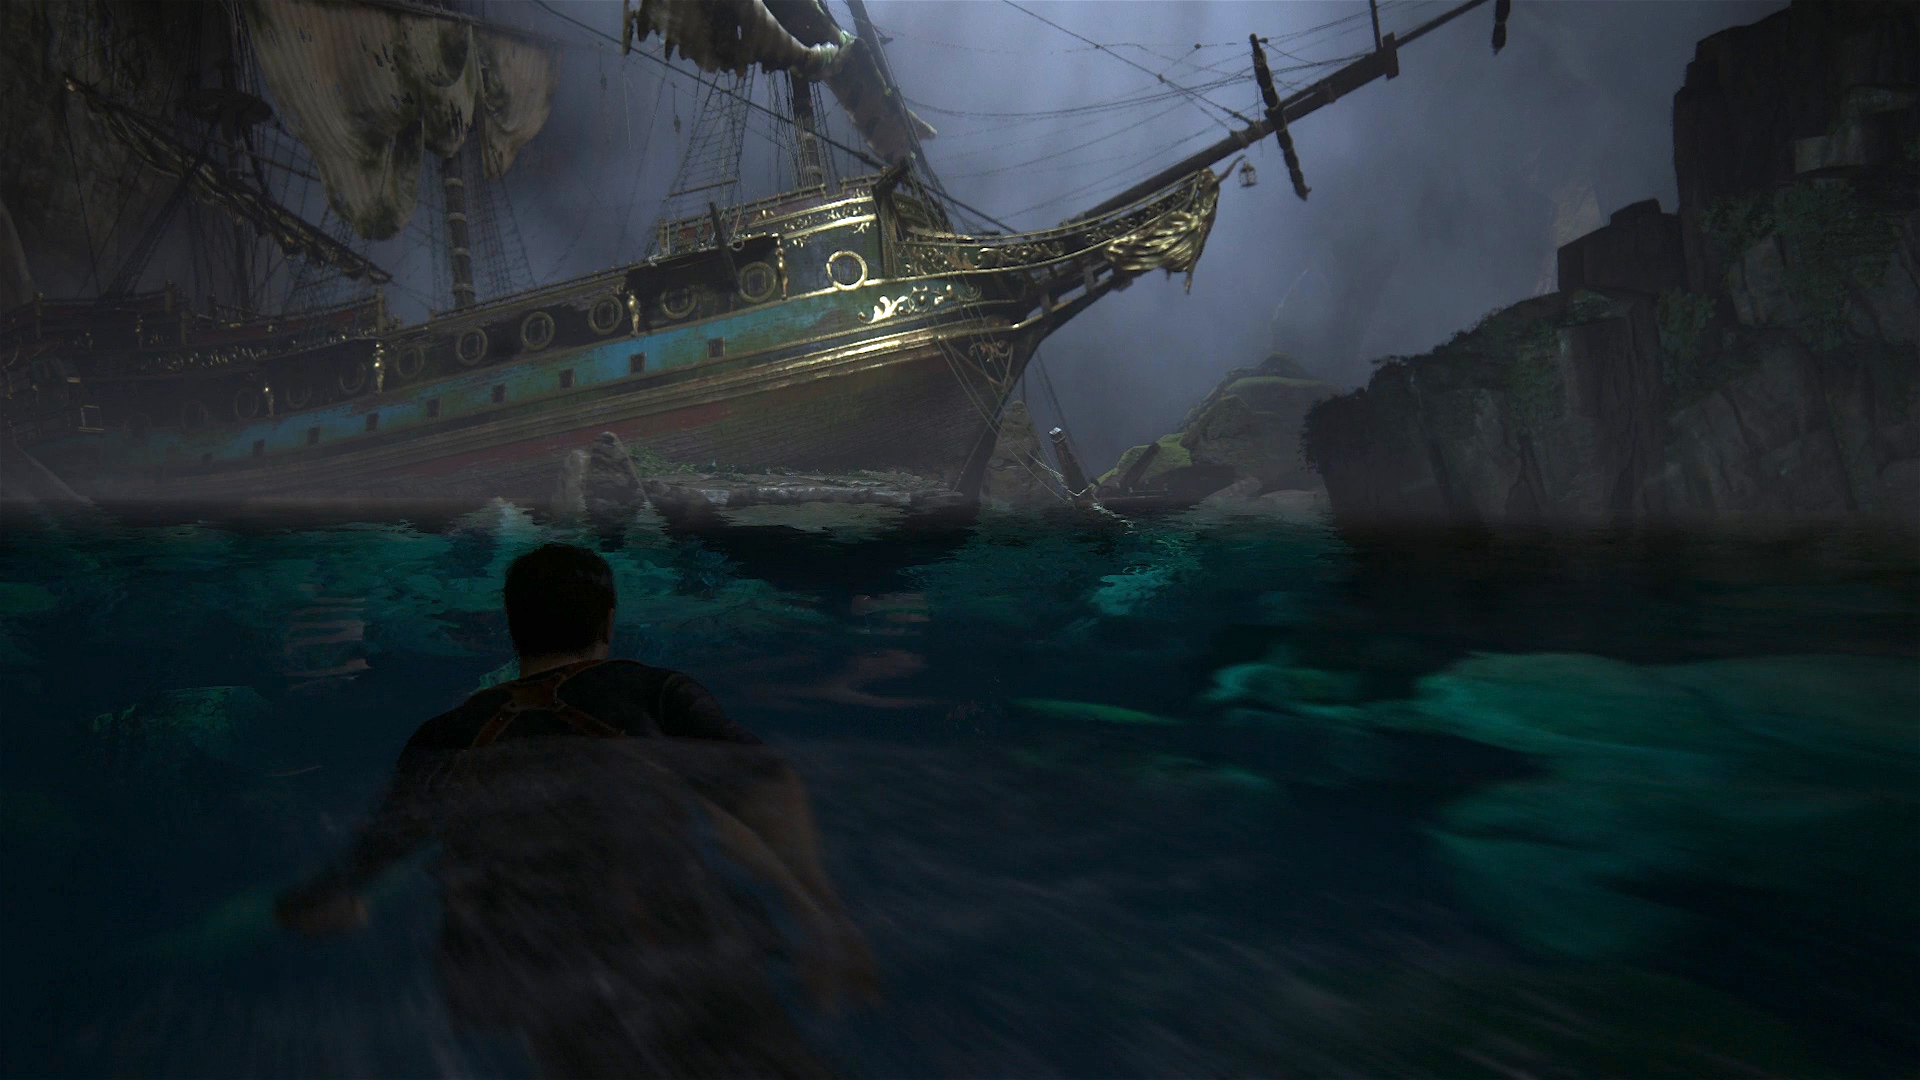 Uncharted 4 A Thiefs End - Uncharted 4: A Thief's End